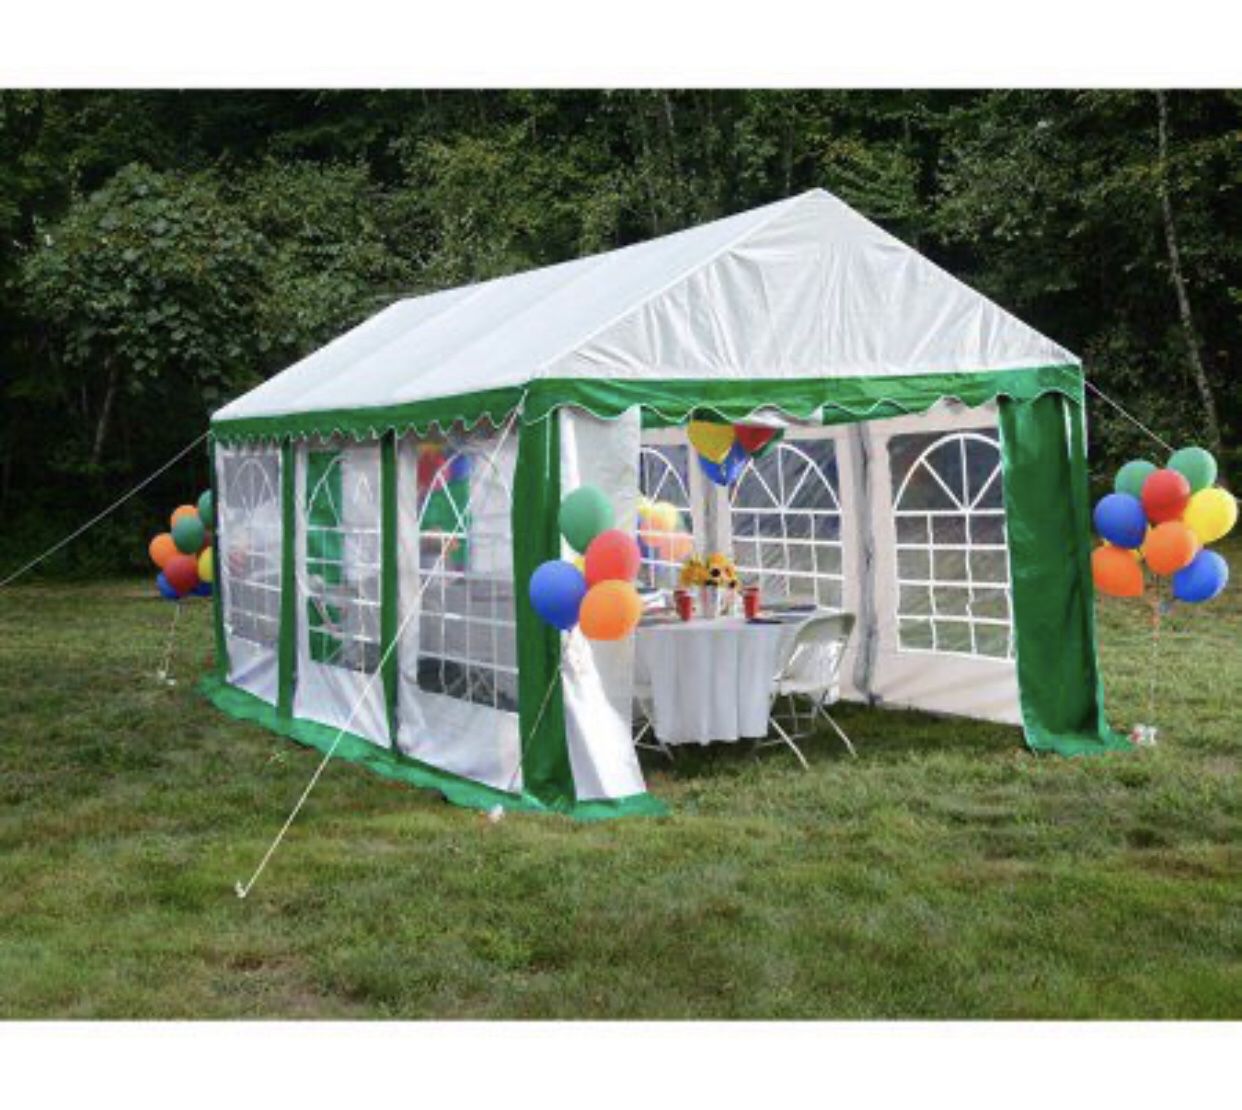 Enclosure Kit with Windows for Party Tent 10' x 20'/3m x 6m, Green/White (Frame and Cover Not Included)